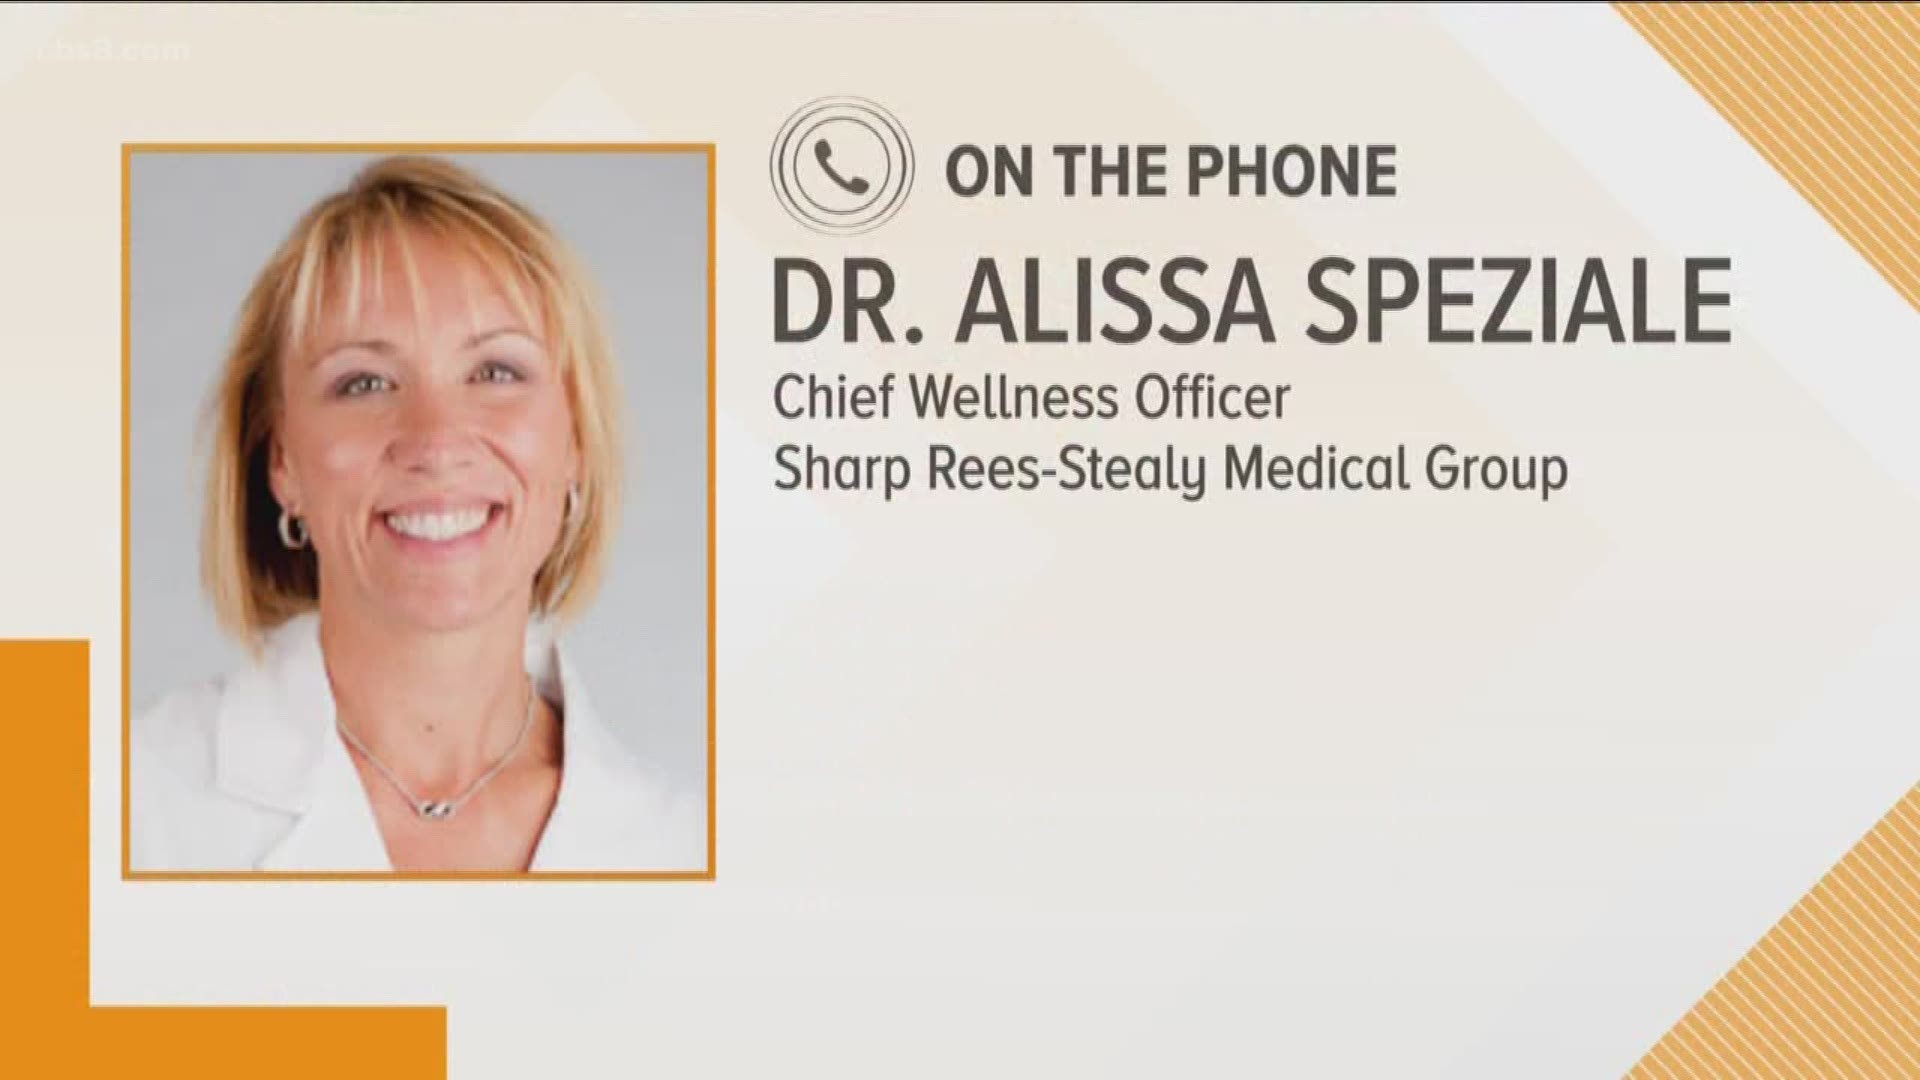 Chief Wellness Officer from Sharp Rees-Stealy, Dr. Alissa Speziale joined Morning Extra to share what you can do to keep your body and mind healthy during this time.